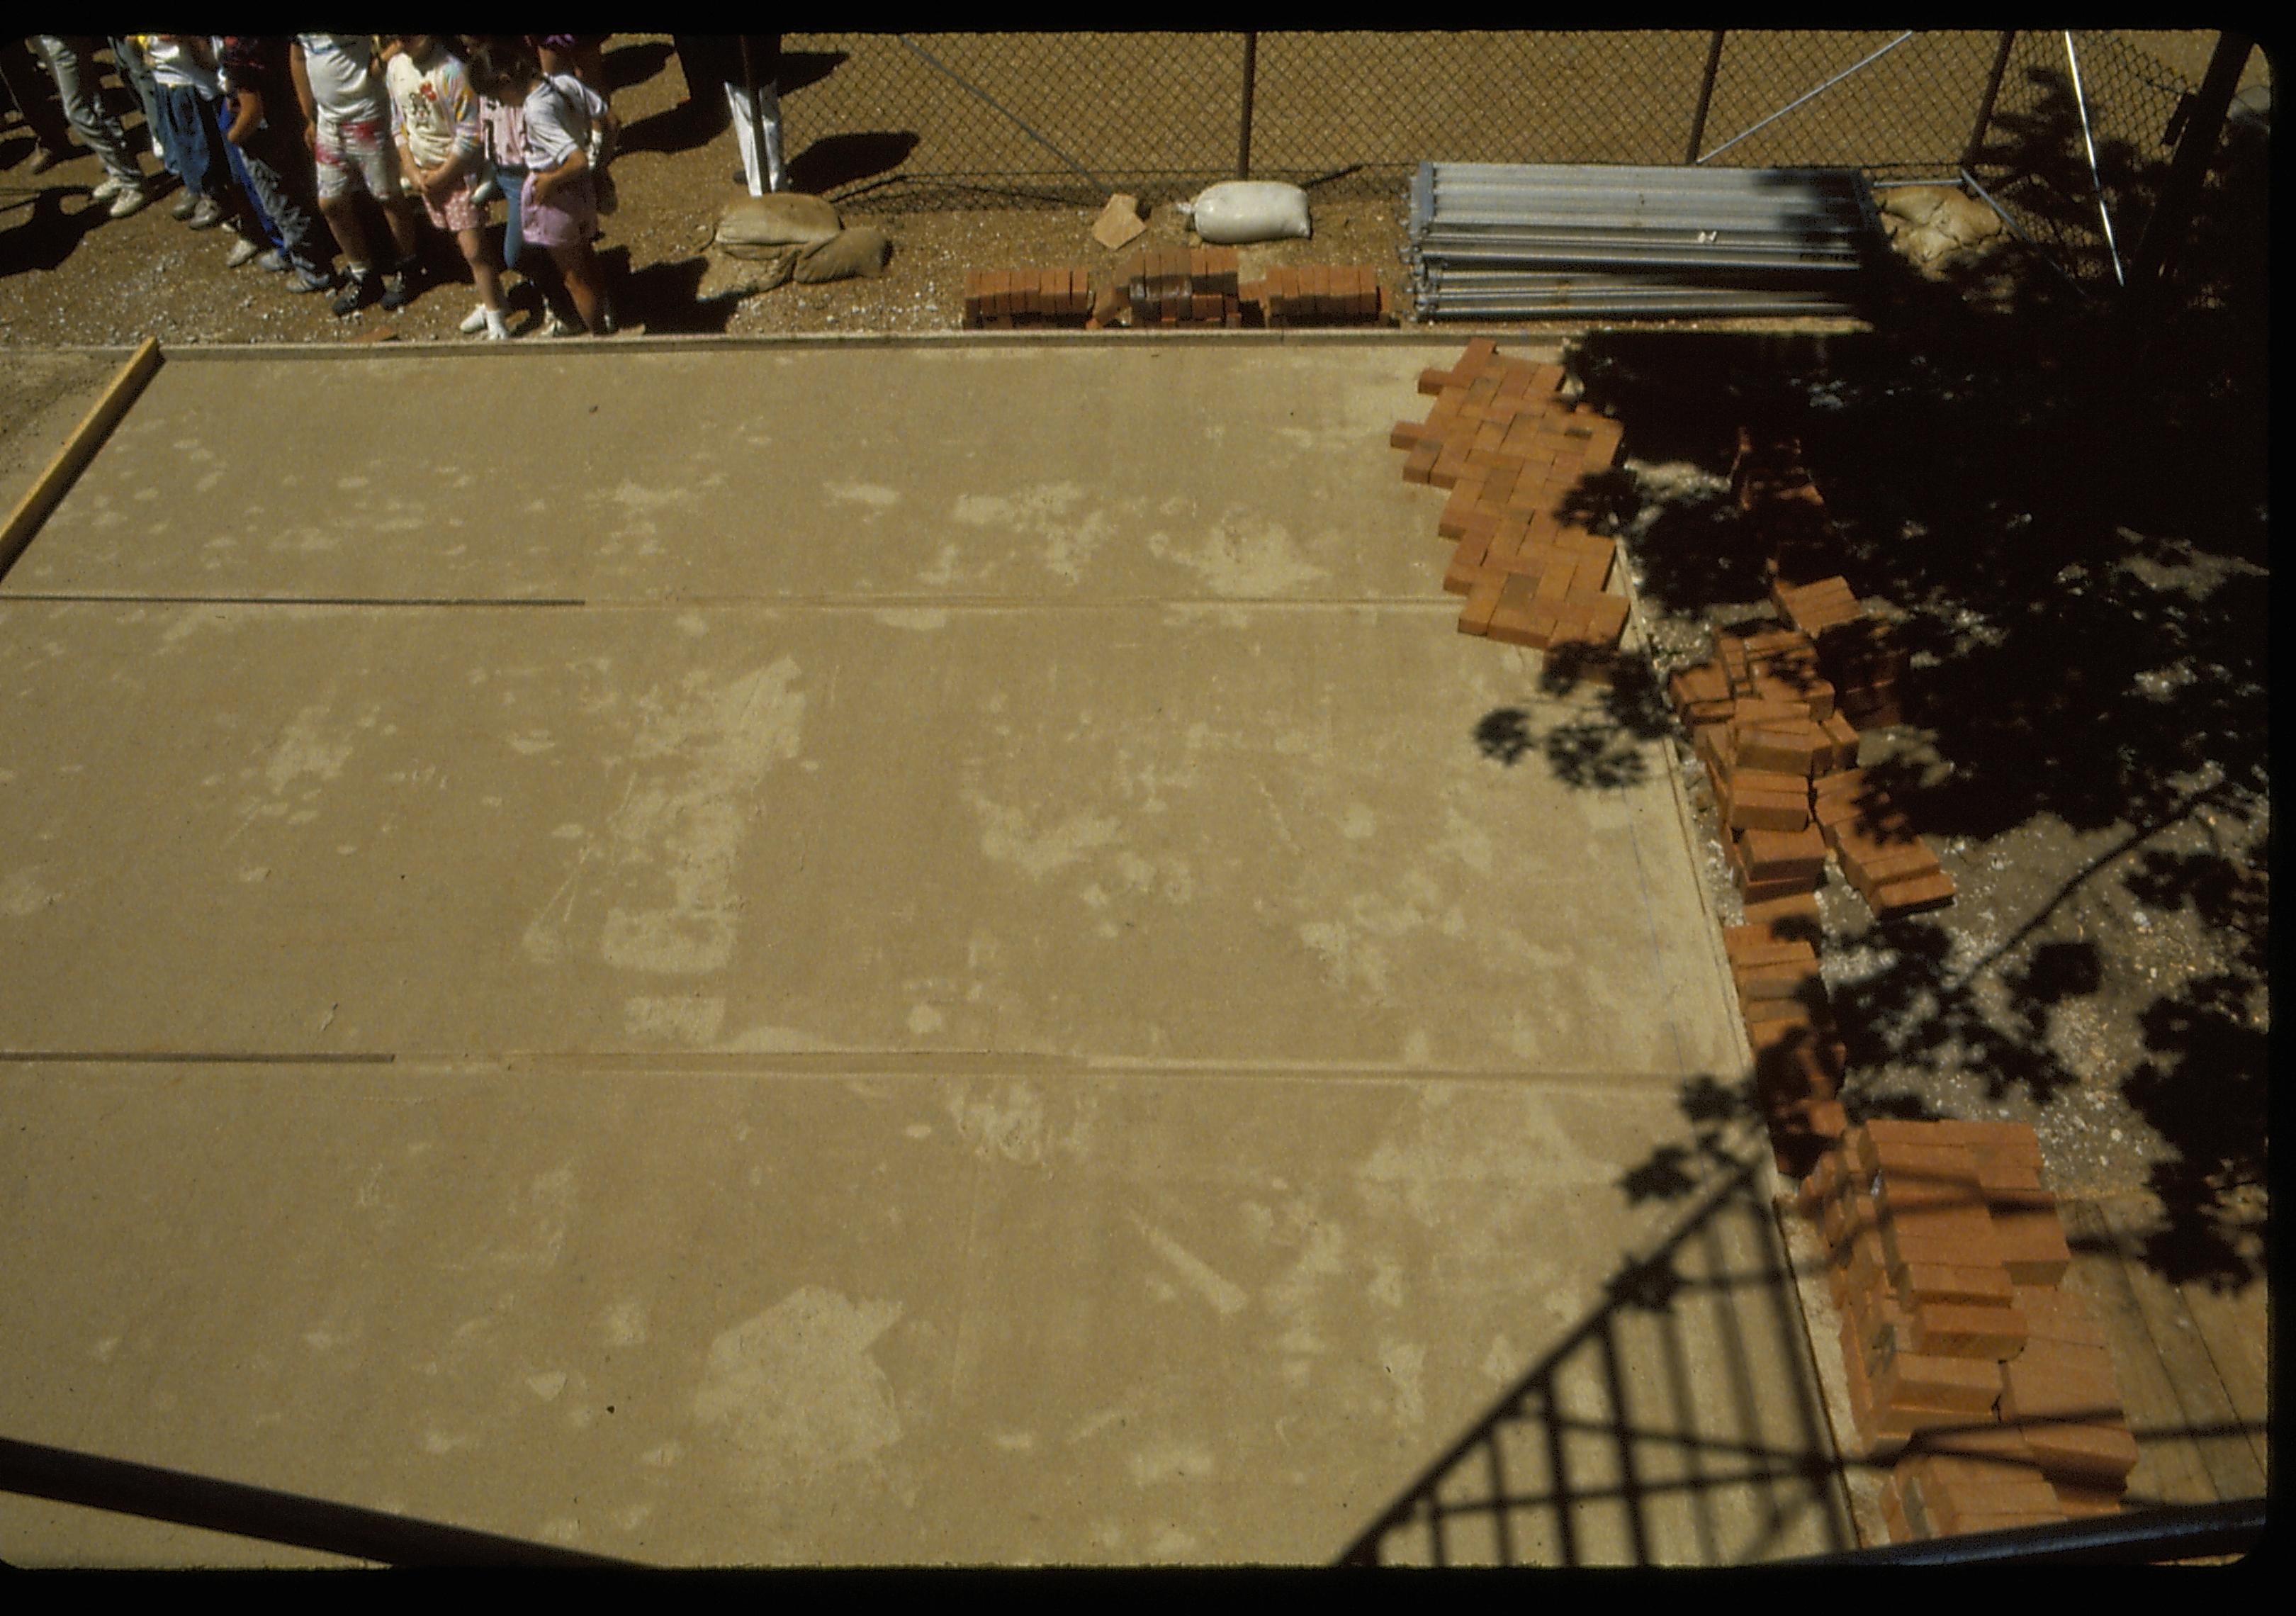 Sand substrate of the Lincoln Home plaza, prior to brick laying. Photographer facing west.